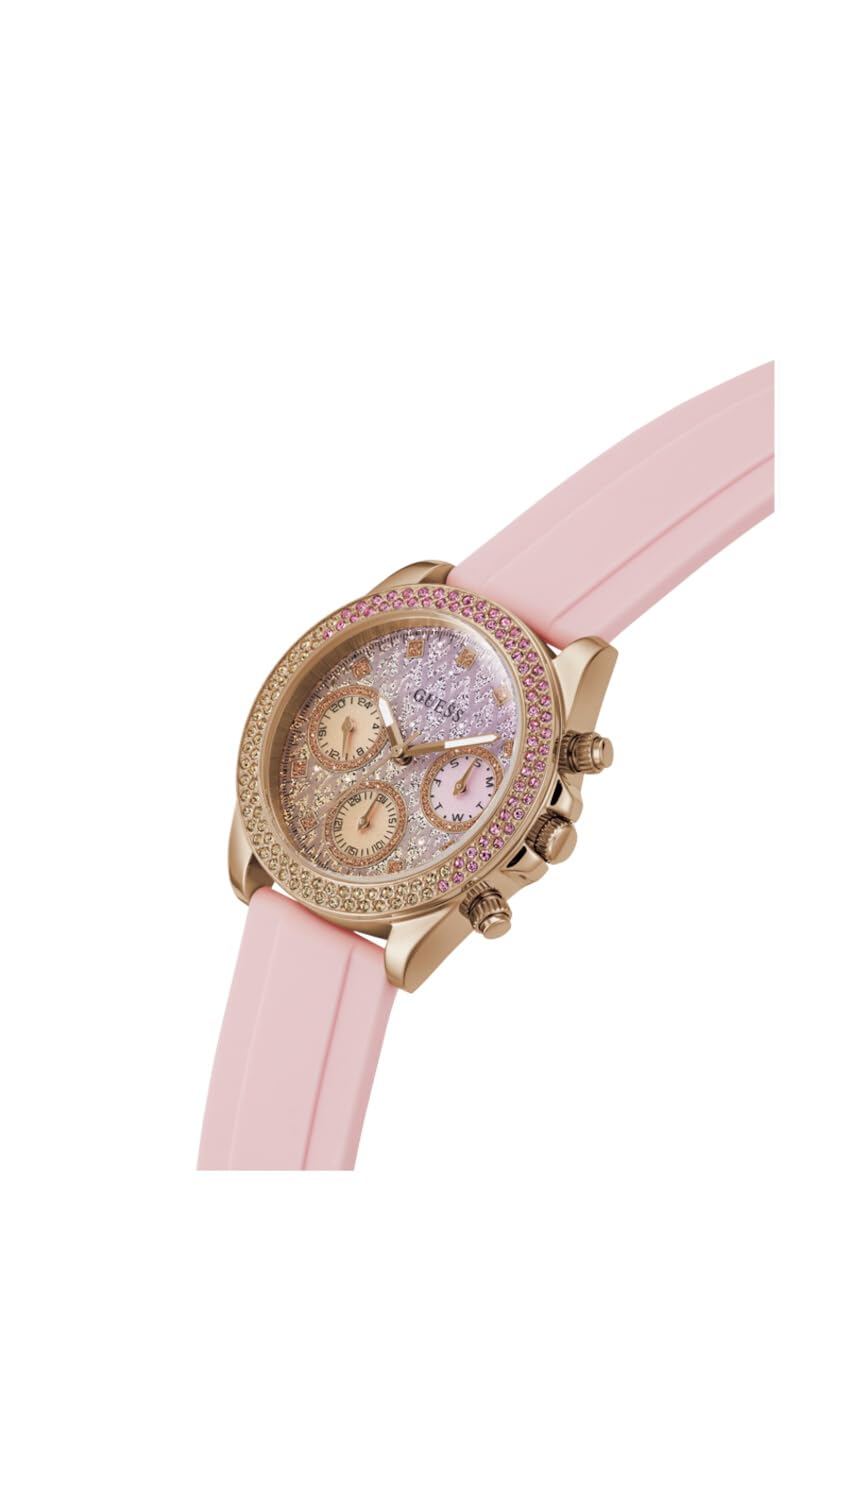 GUESS Women's 38mm Watch - Pink Strap Pink Dial Rose Gold Tone Case